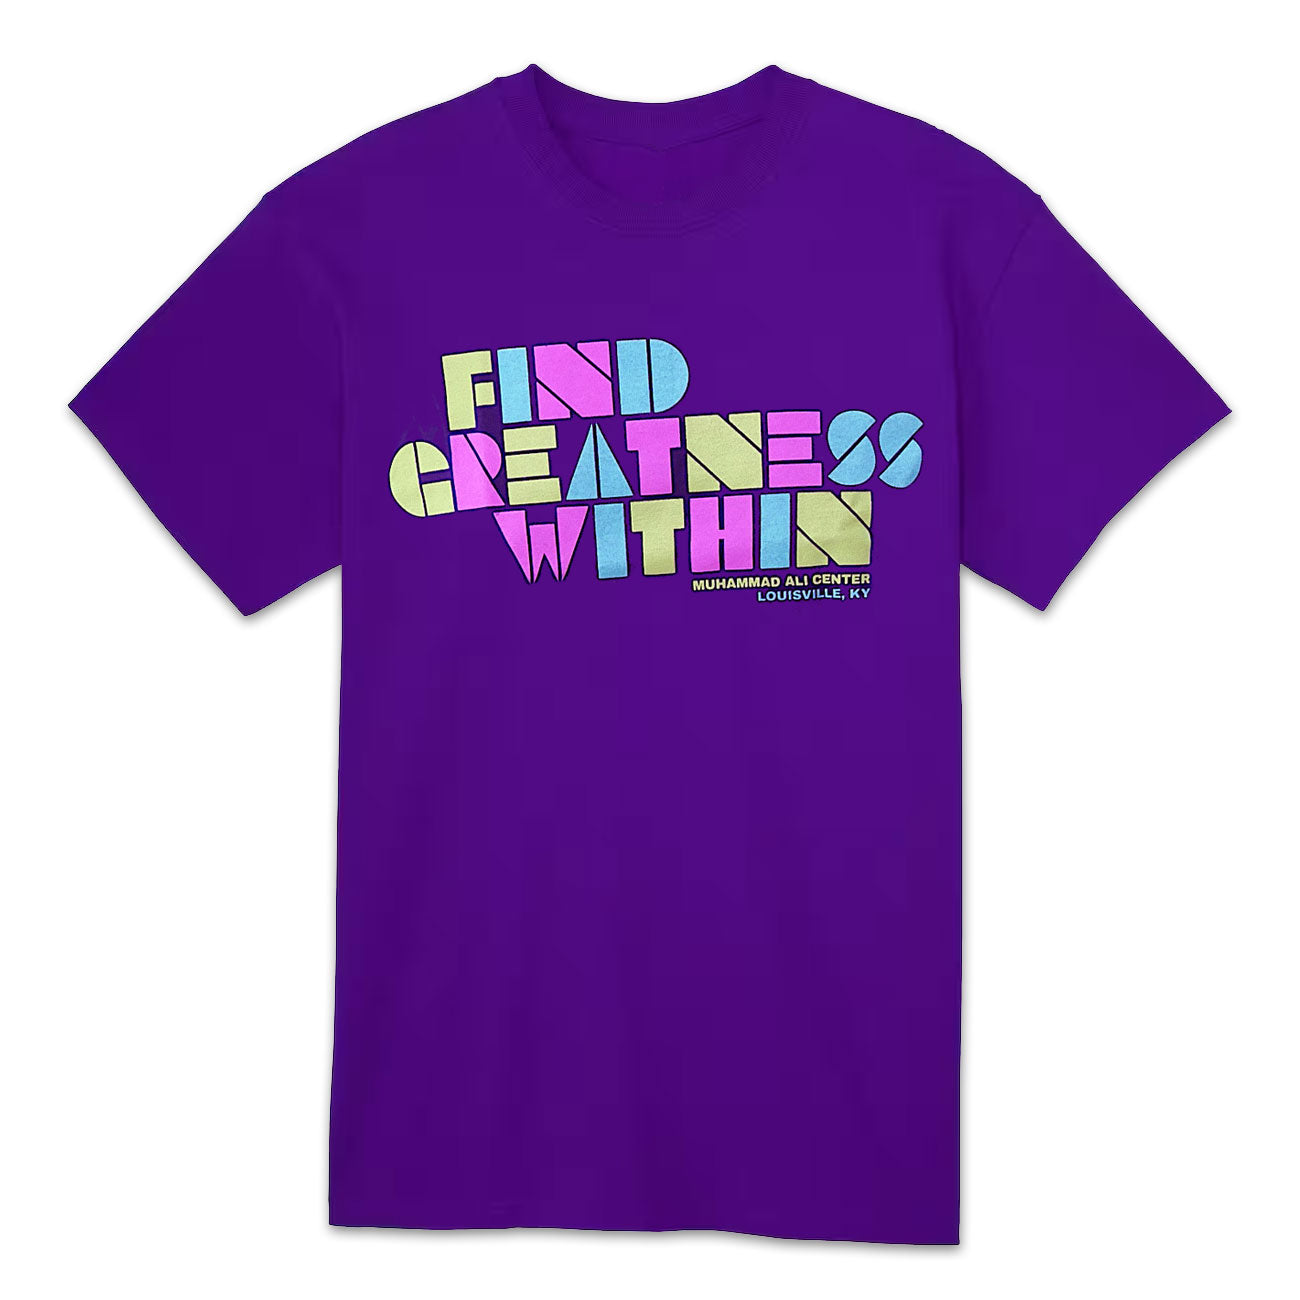 Find Greatness Within T-shirt